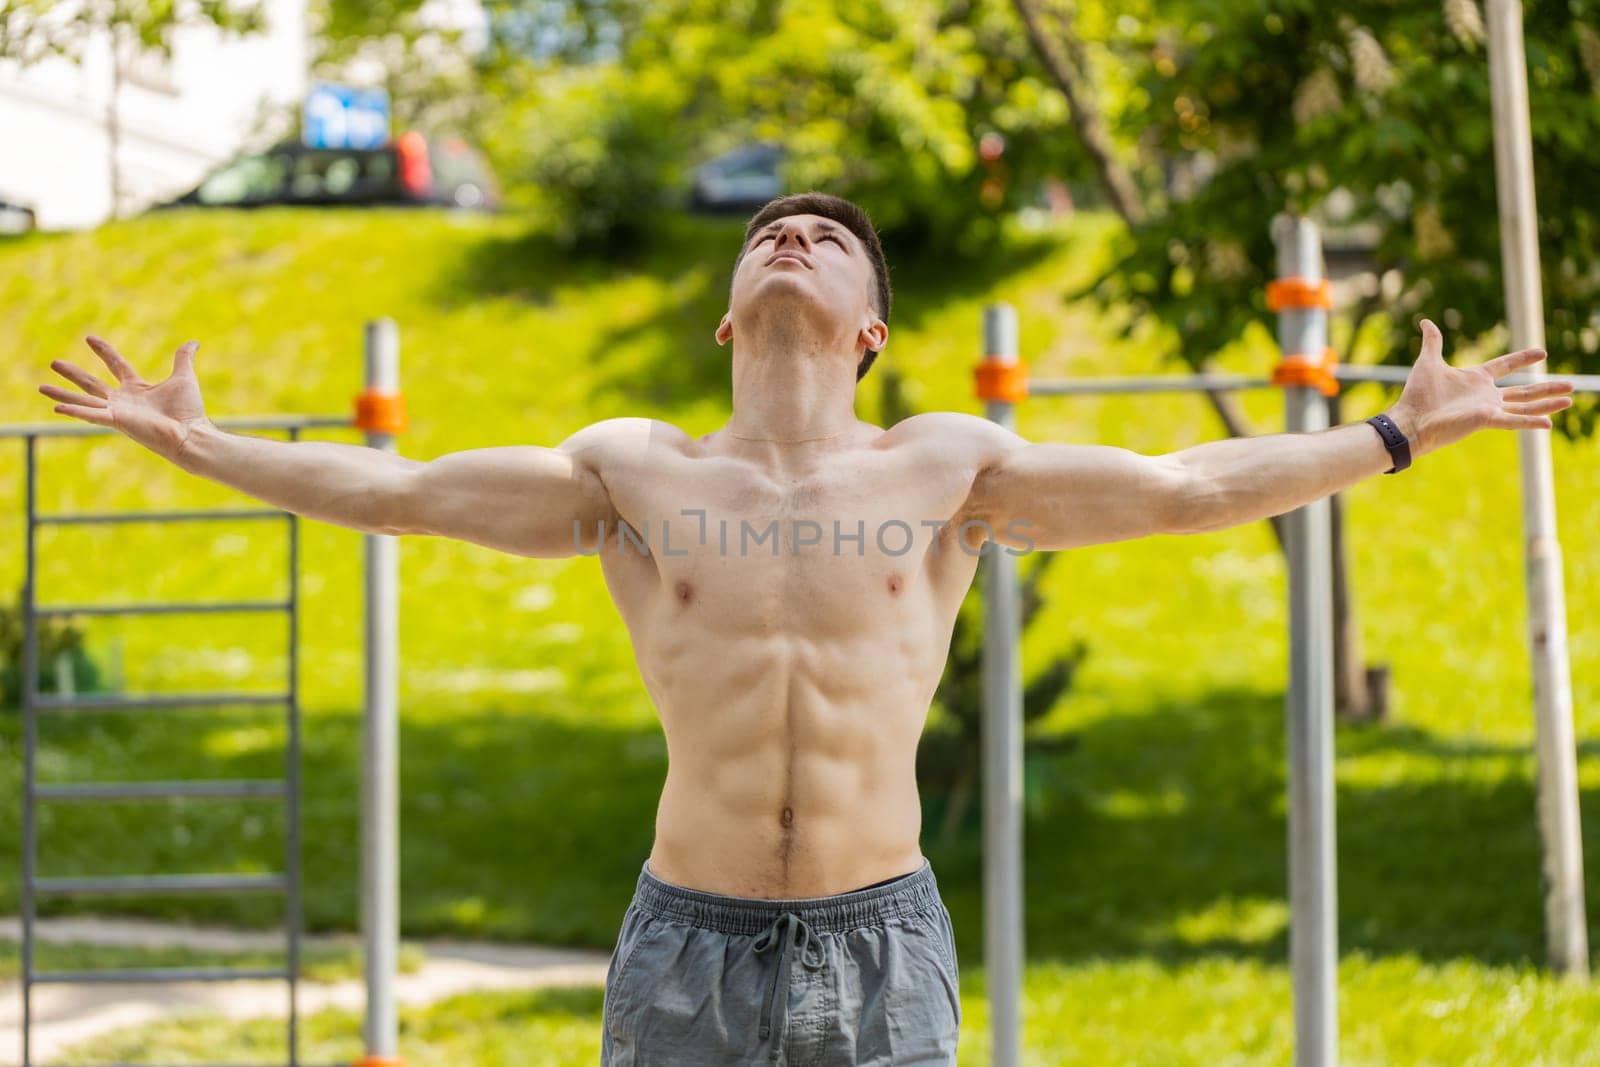 Athletic caucasian topless muscular man stretching body, warm up before cardio workout exercises. Young guy on playground. Sports, health, fitness routine workout. Strength and motivation. Outdoor gym